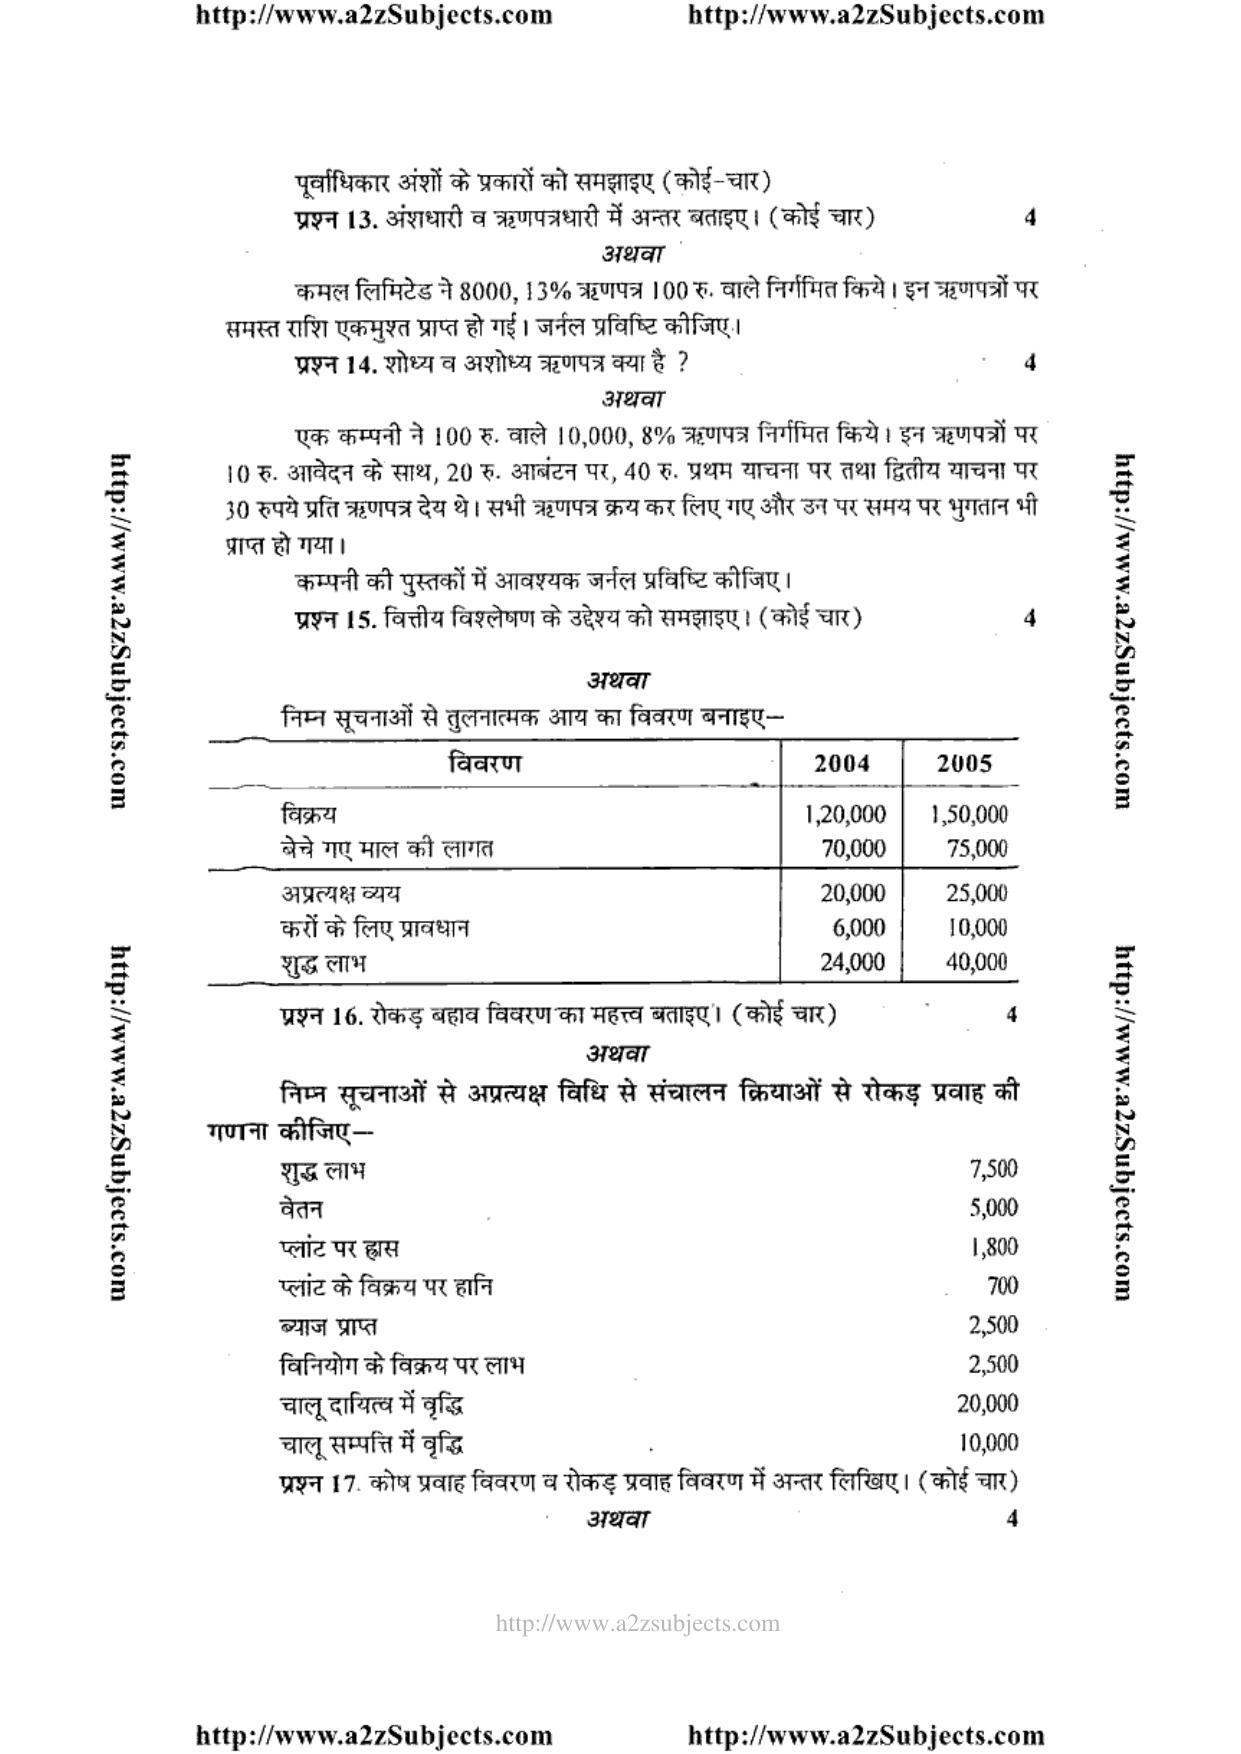 MP Board Class 12 Book Keeping And Accountancy 2015 Question Paper - Page 3